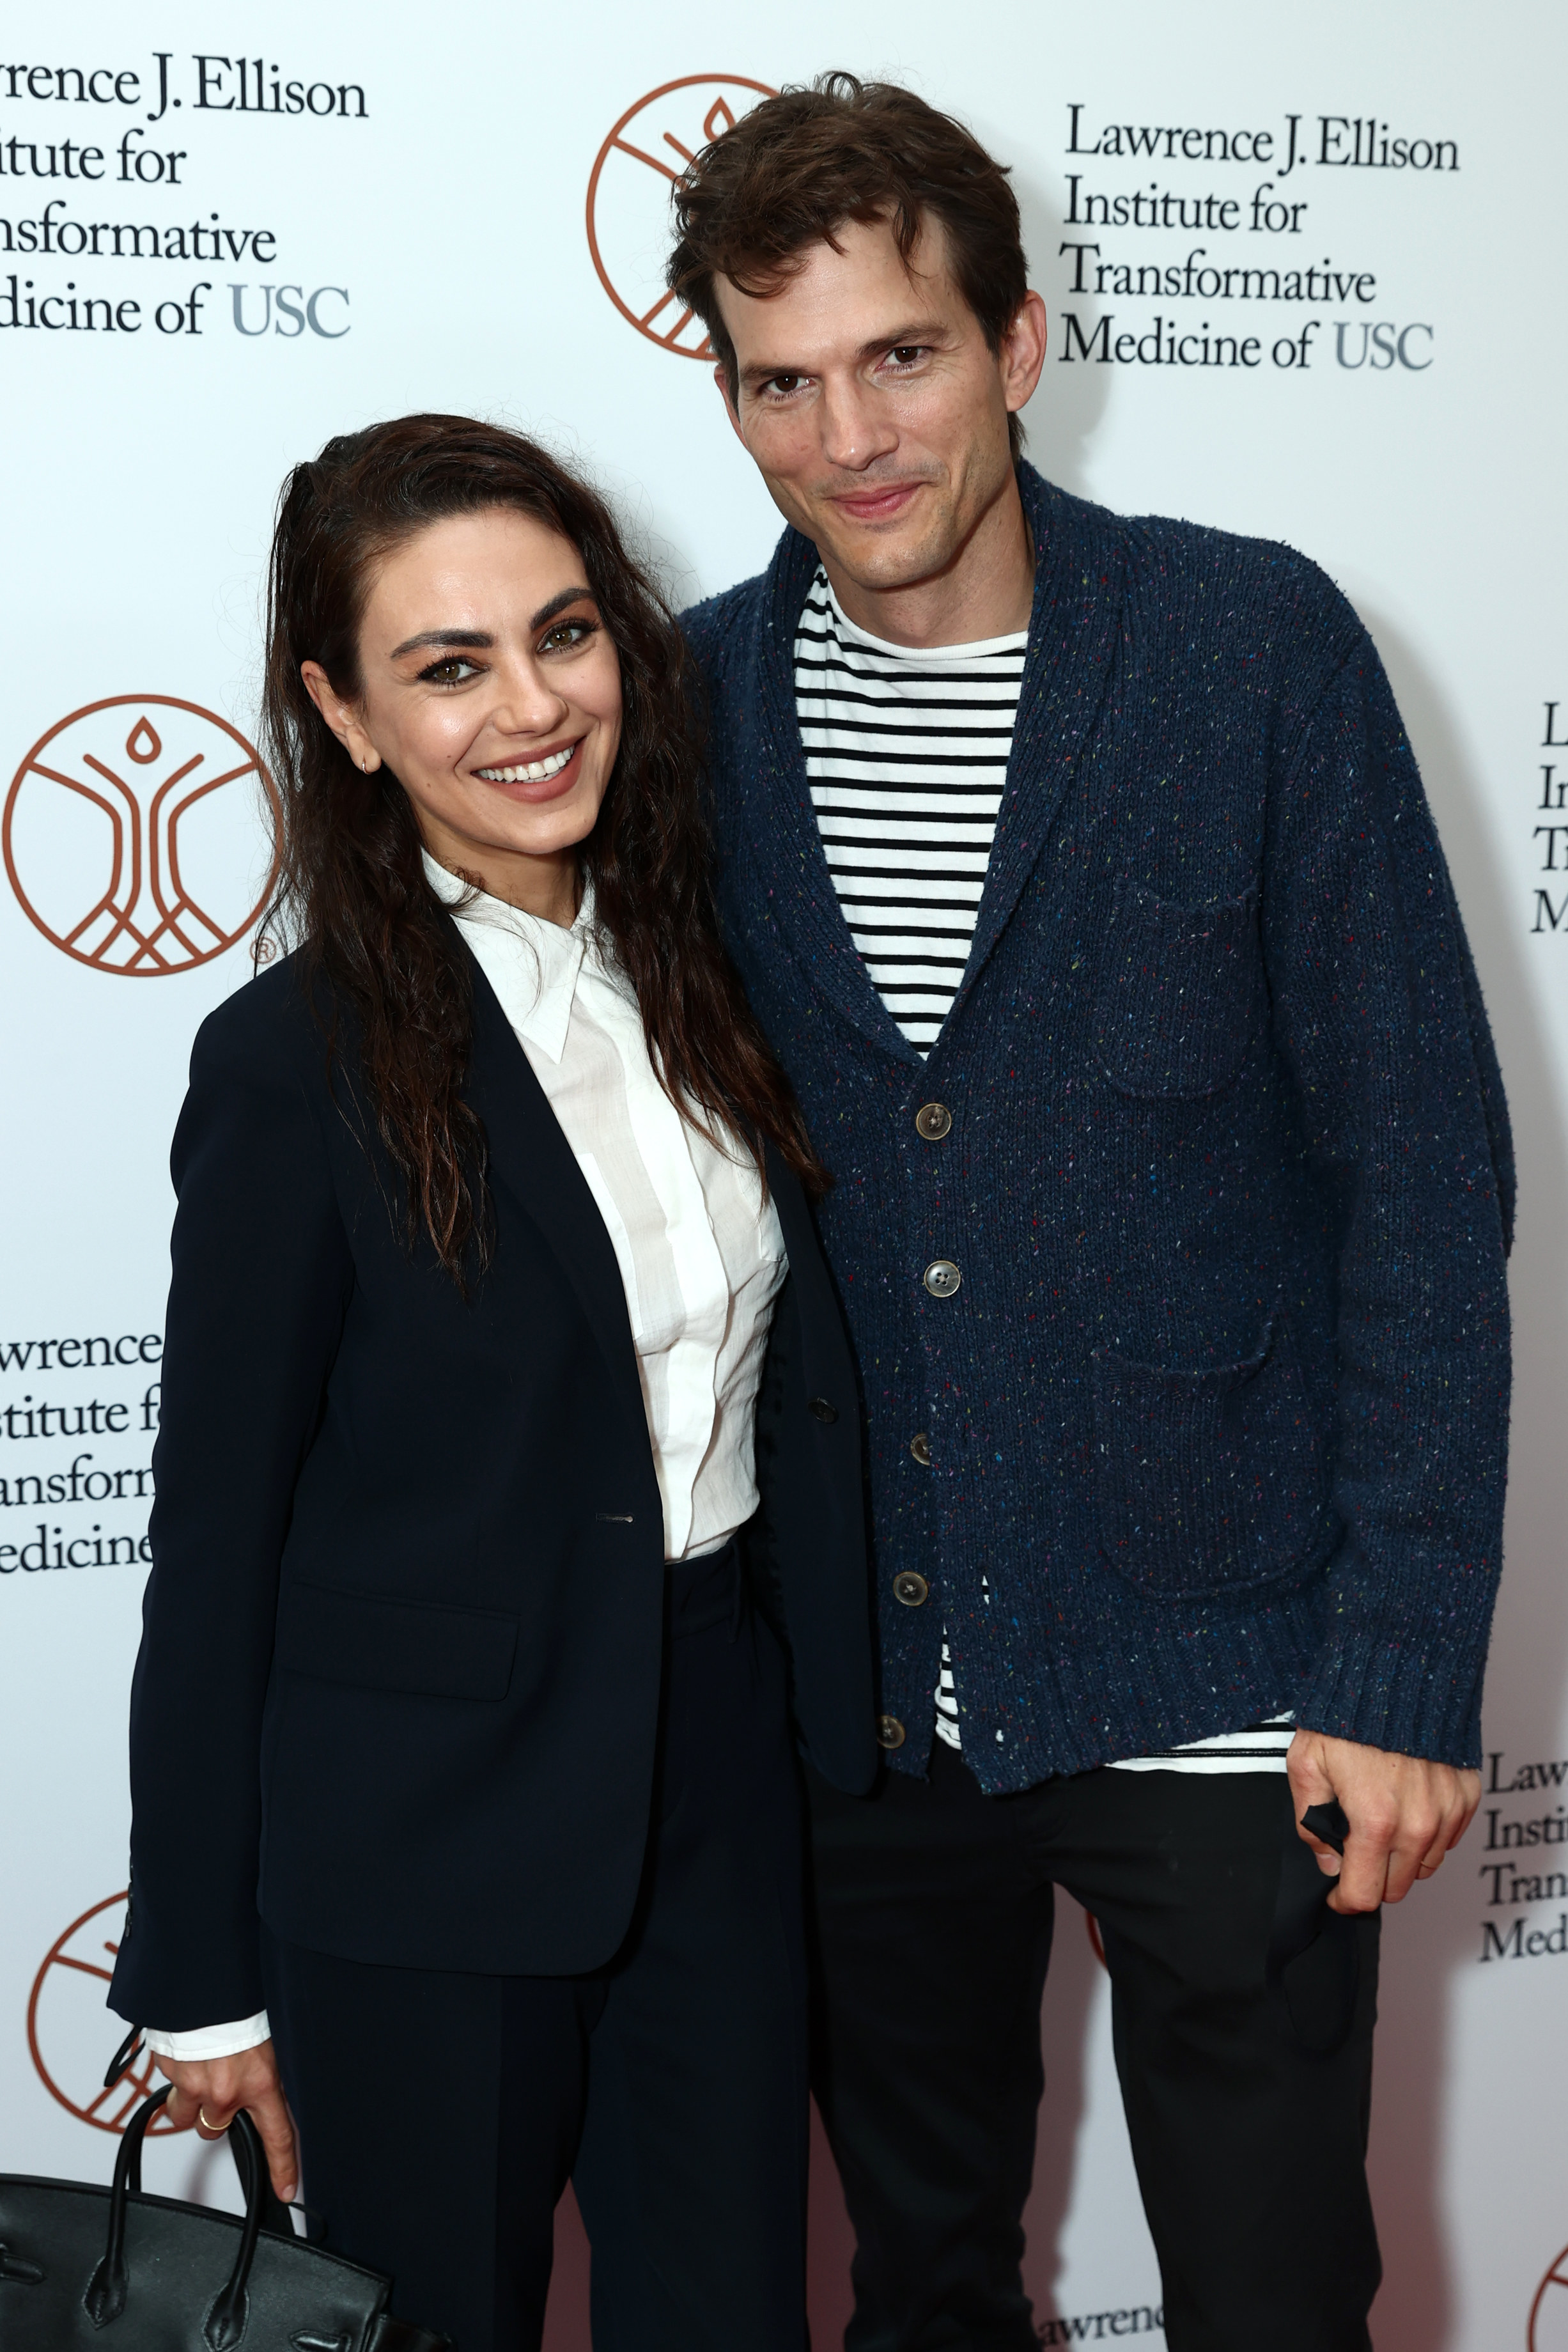 Mila Kunis and Ashton Kutcher attend the Grand Opening of the Lawrence J. Ellison Institute